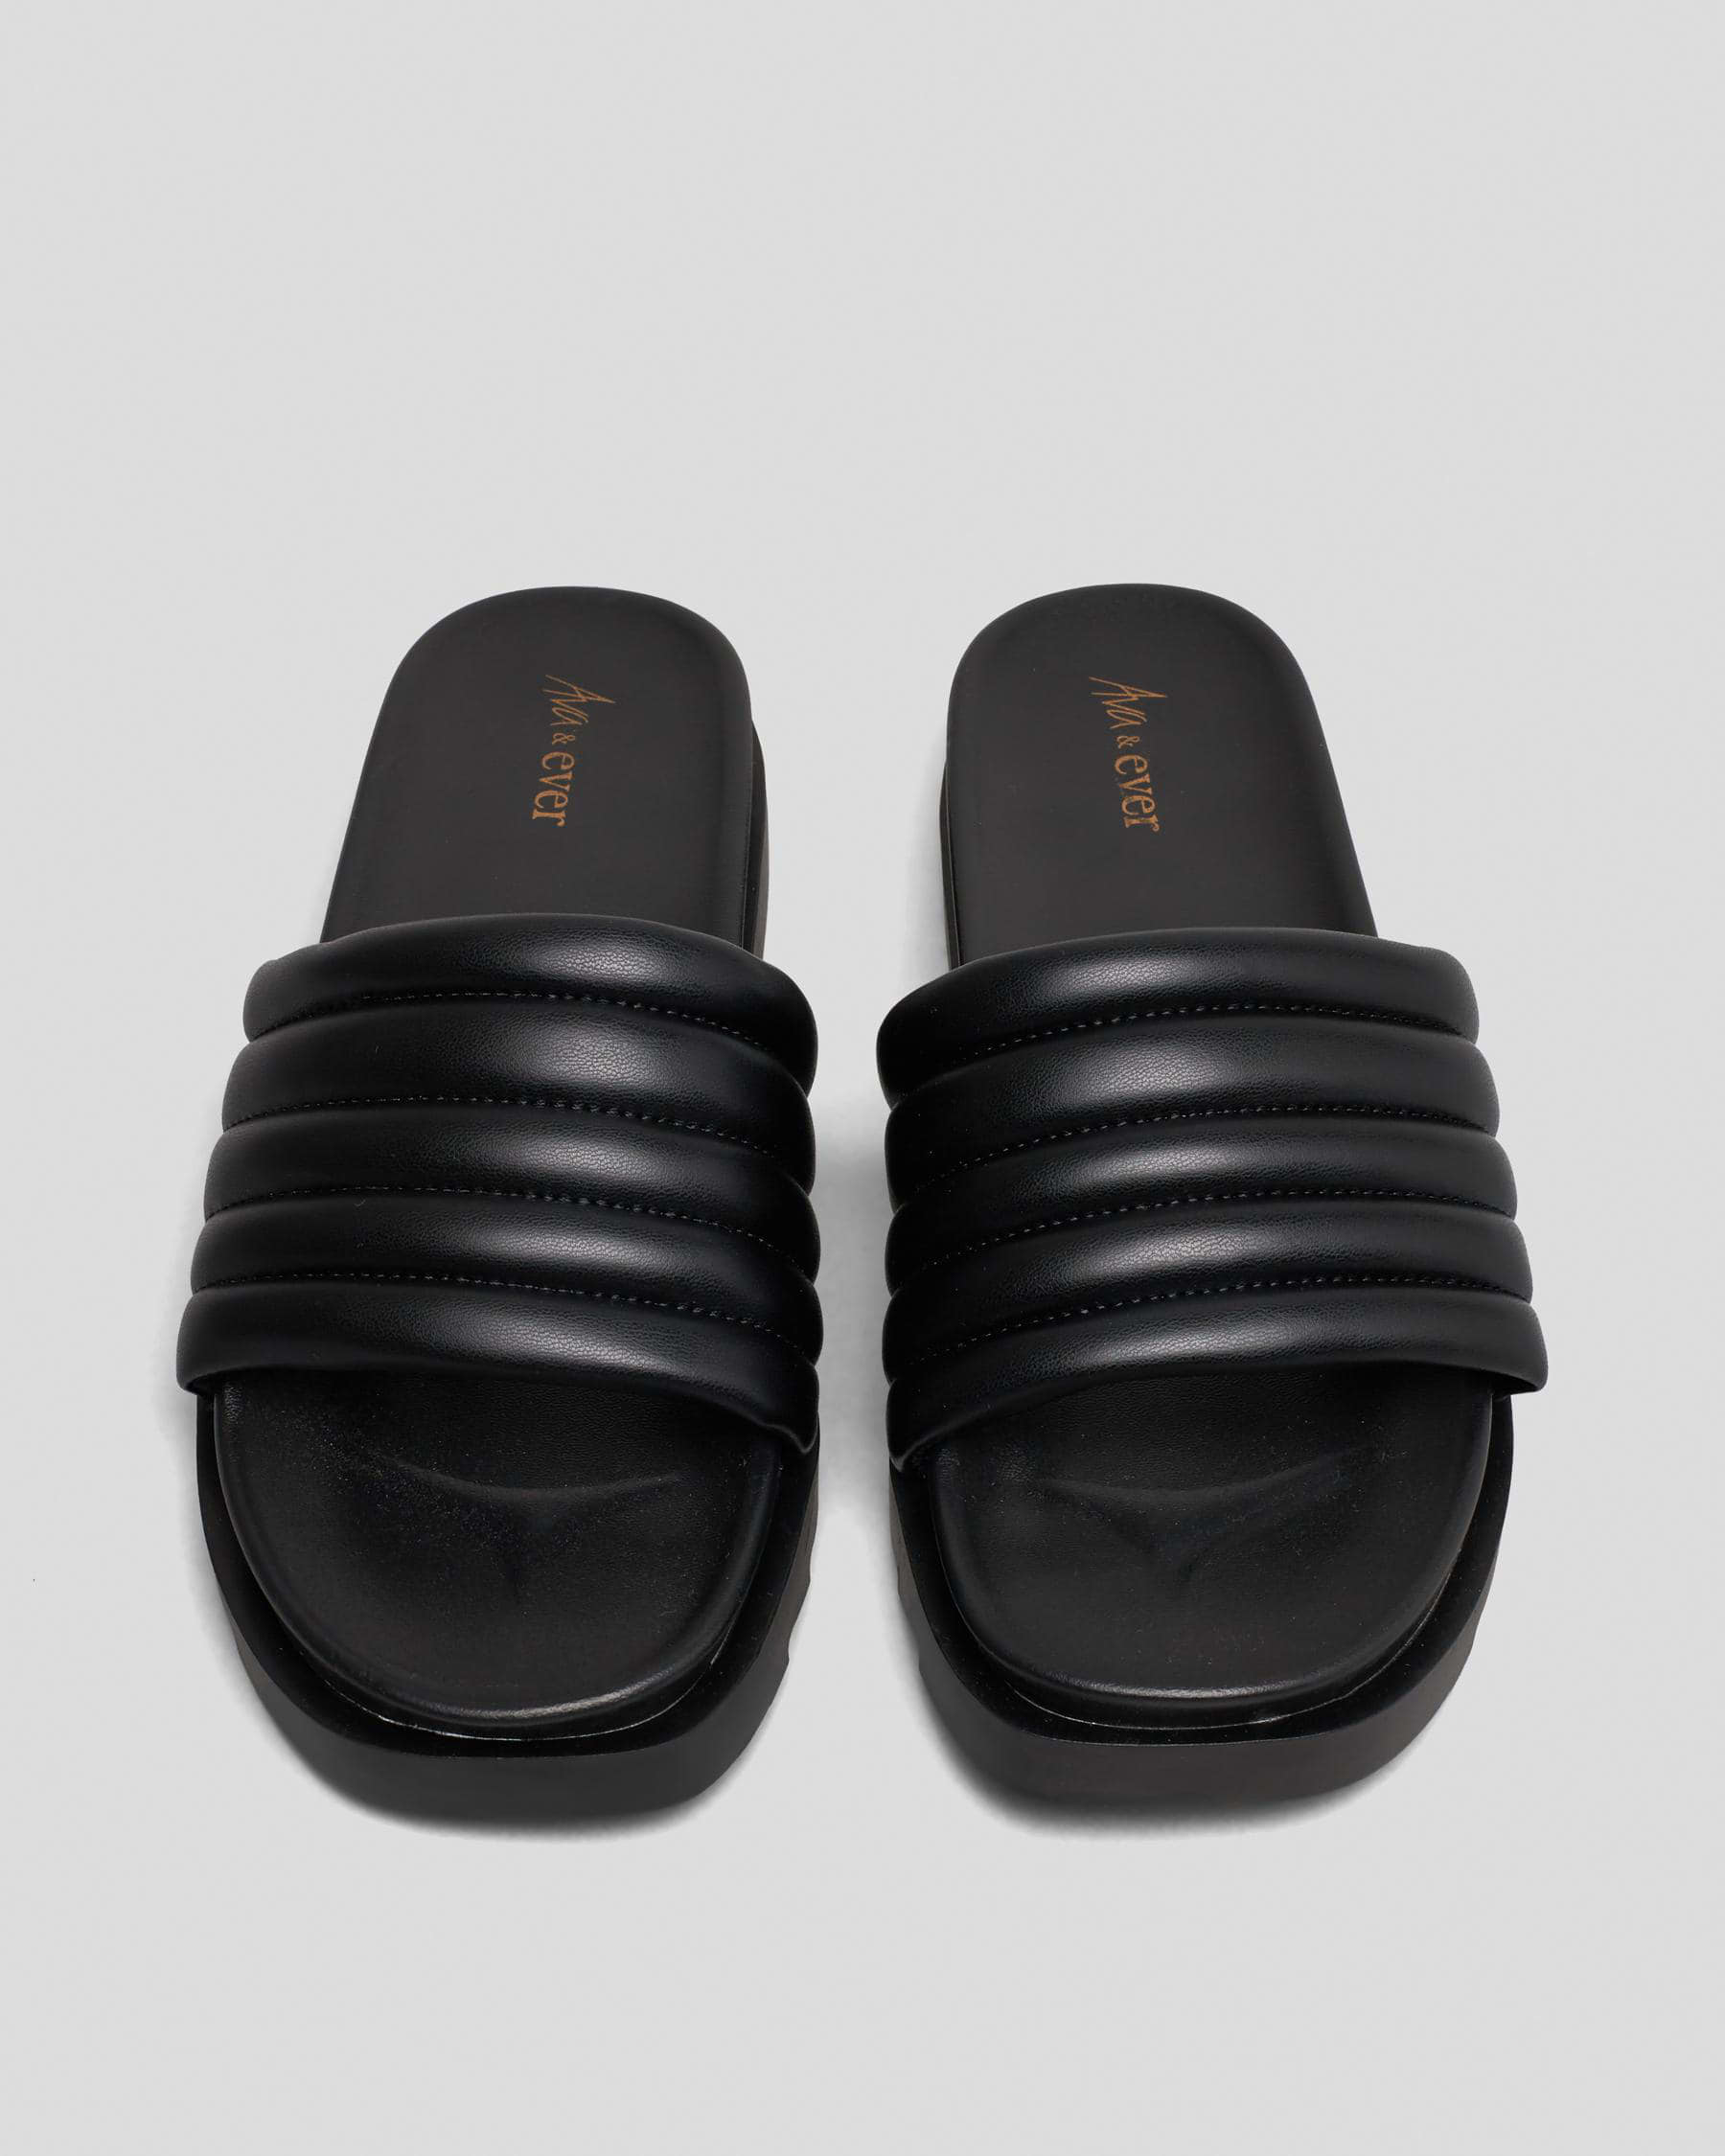 Ava And Ever Cairo Slide Sandals In Black - Fast Shipping & Easy ...